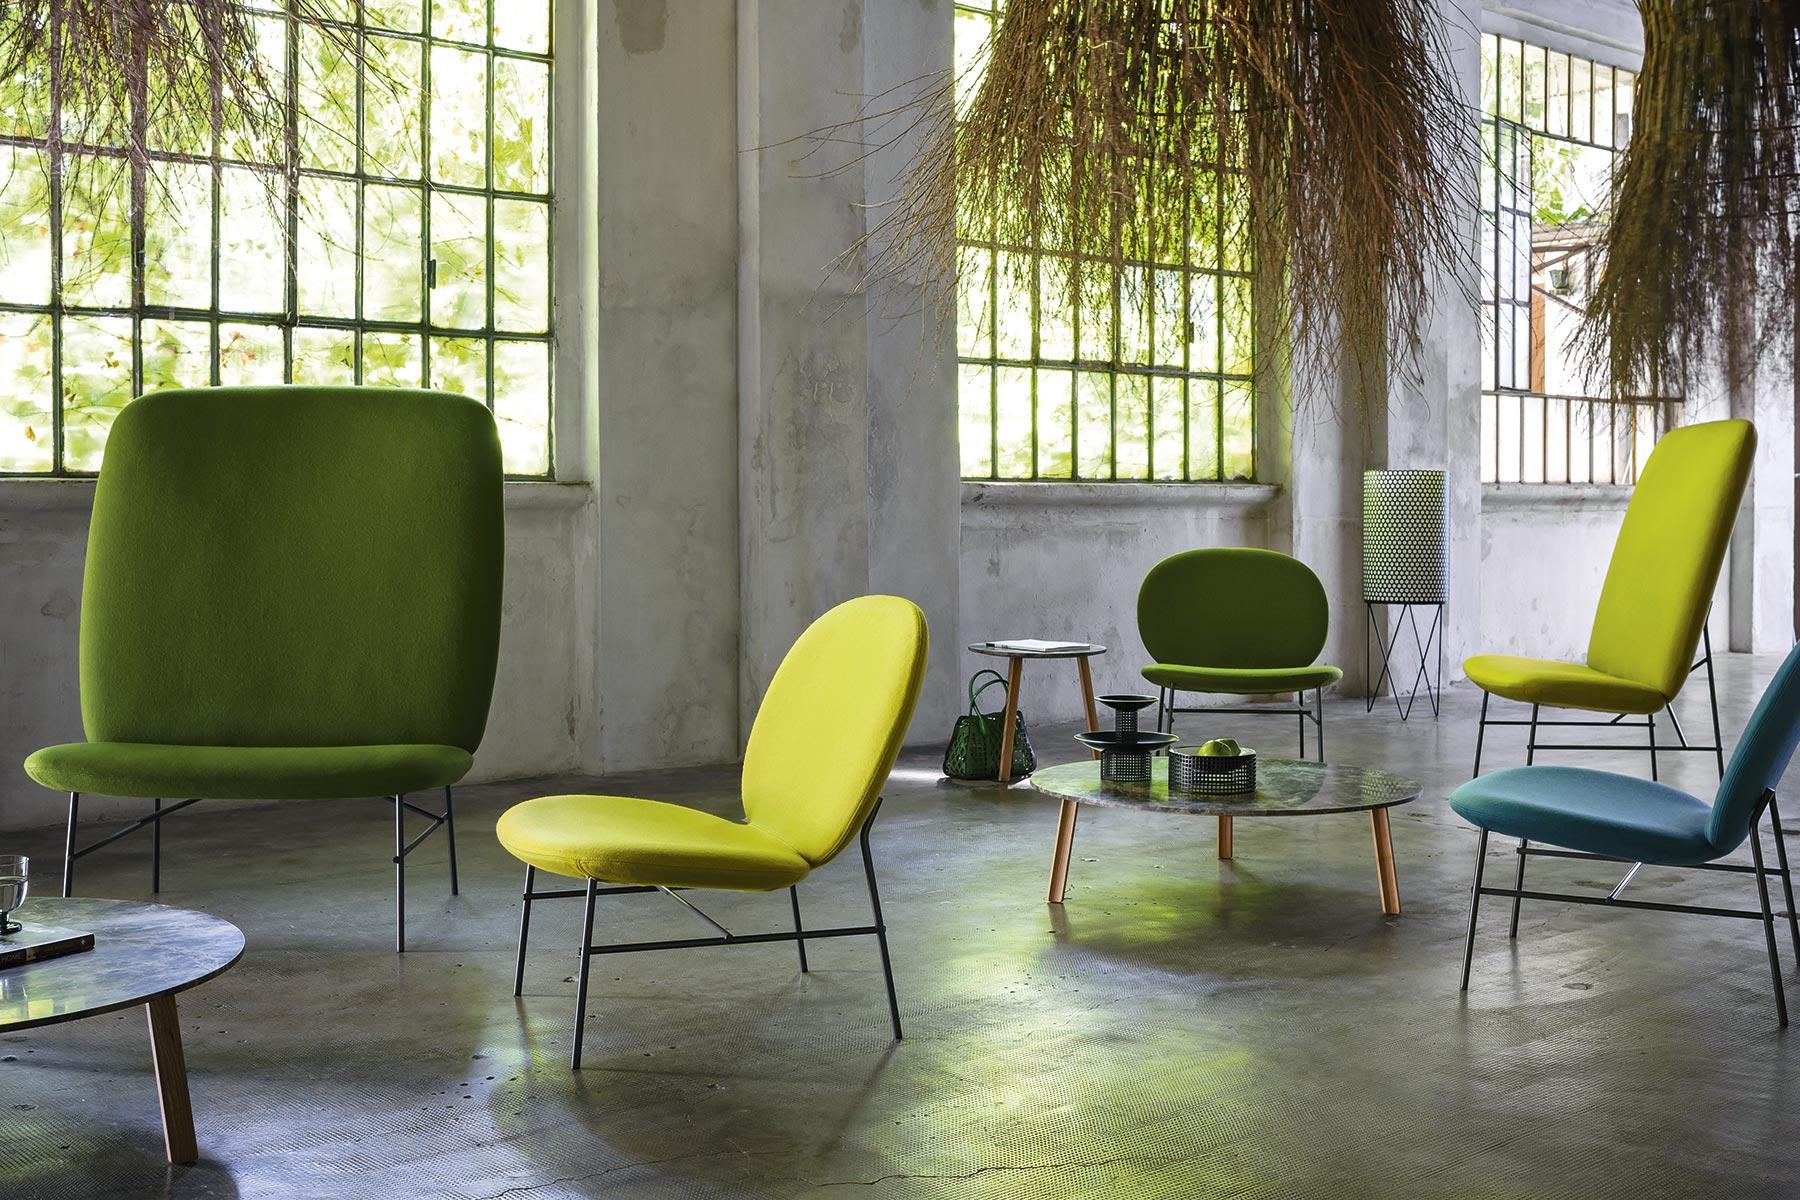 Contours and color. A Minimalist celebration of clear, rounded contrasts. Taking inspiration from the artistic vision of Ellsworth Kelly, this is a multi-award-winning collection of seating elements. The irresistibly smart design comes in a